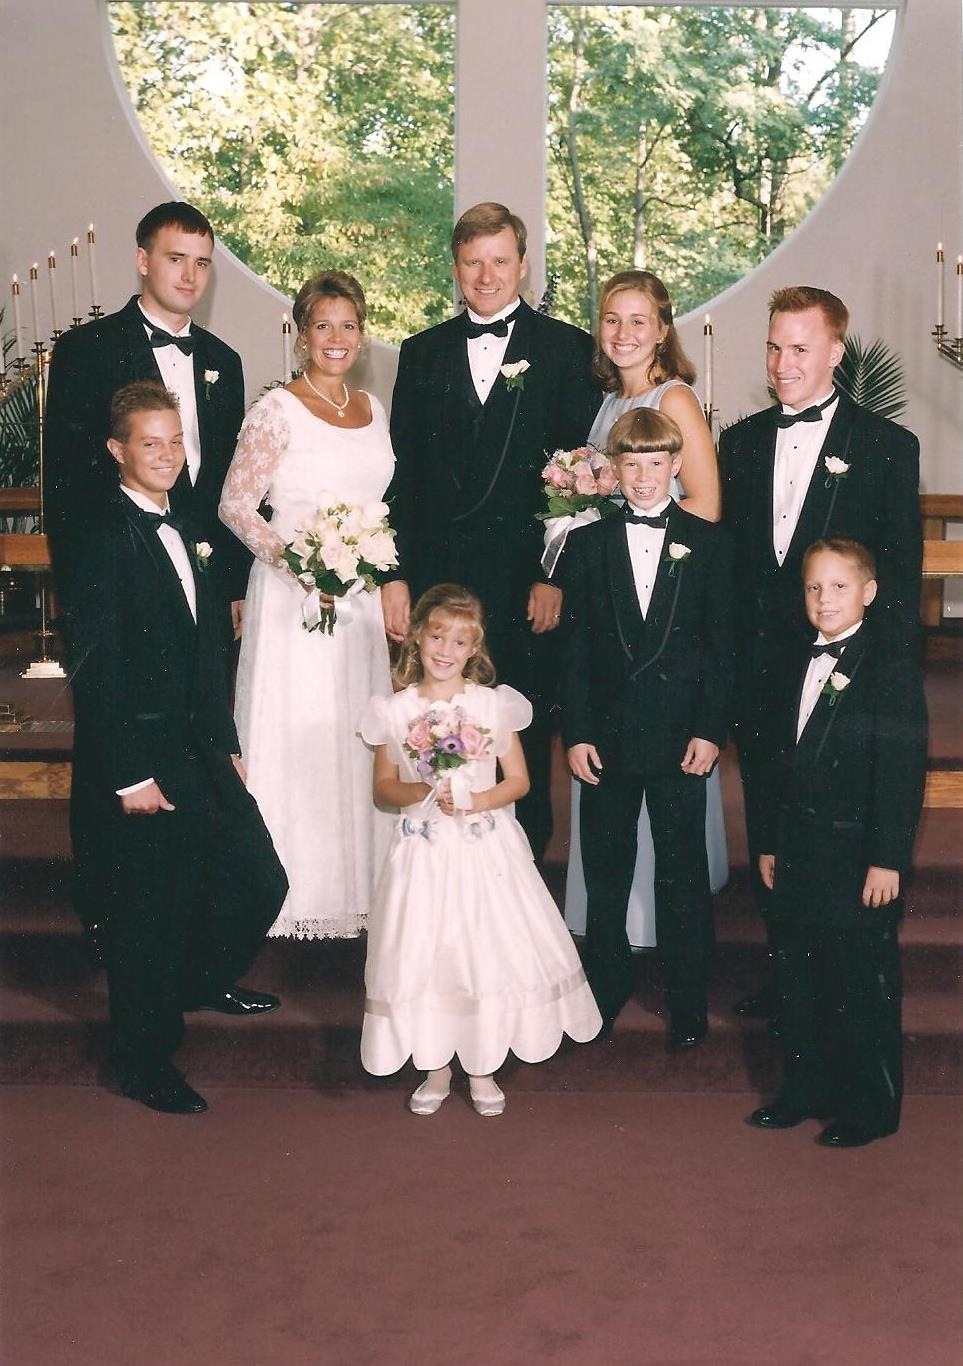 Fifteen years ago when we became a blended family 